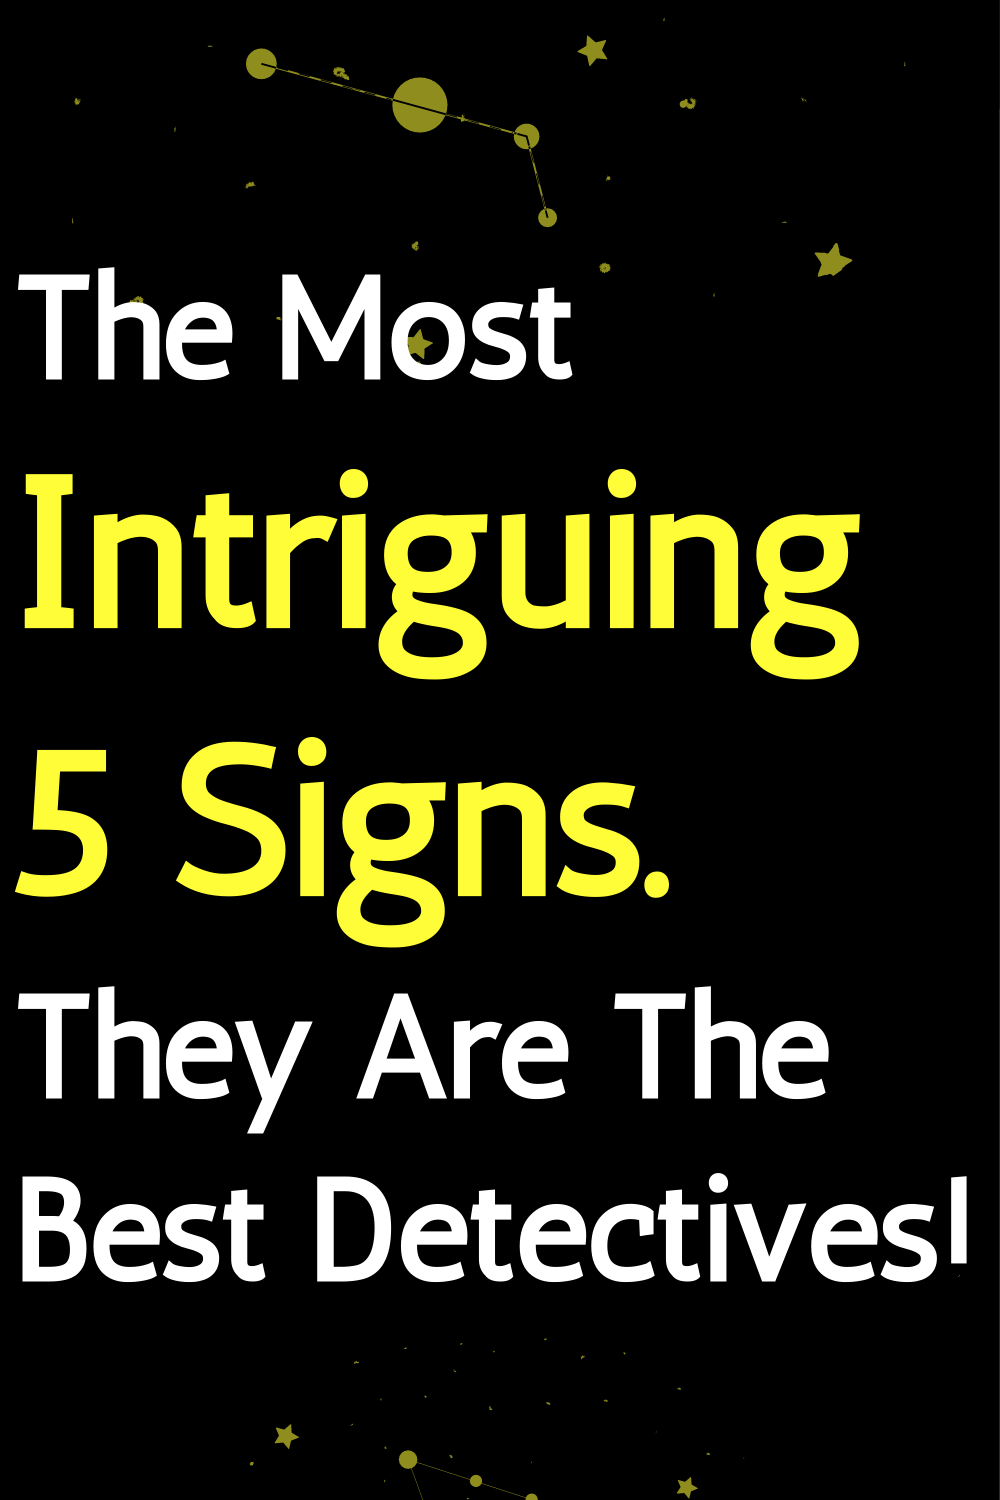 The Most Intriguing 5 Signs. They Are The Best Detectives!